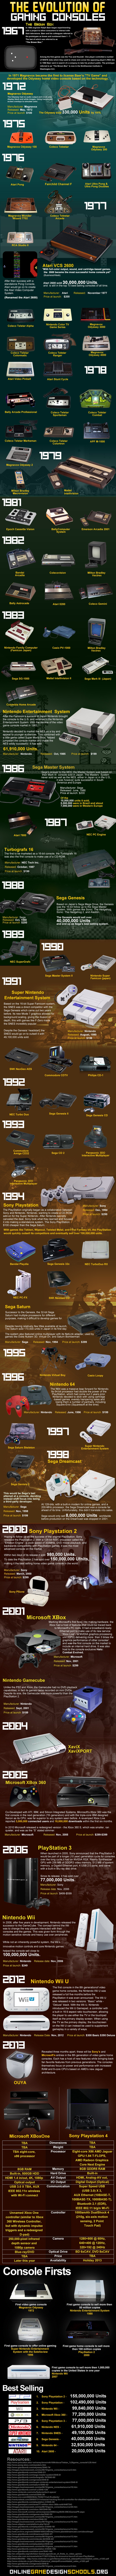 video_game_console_infographic